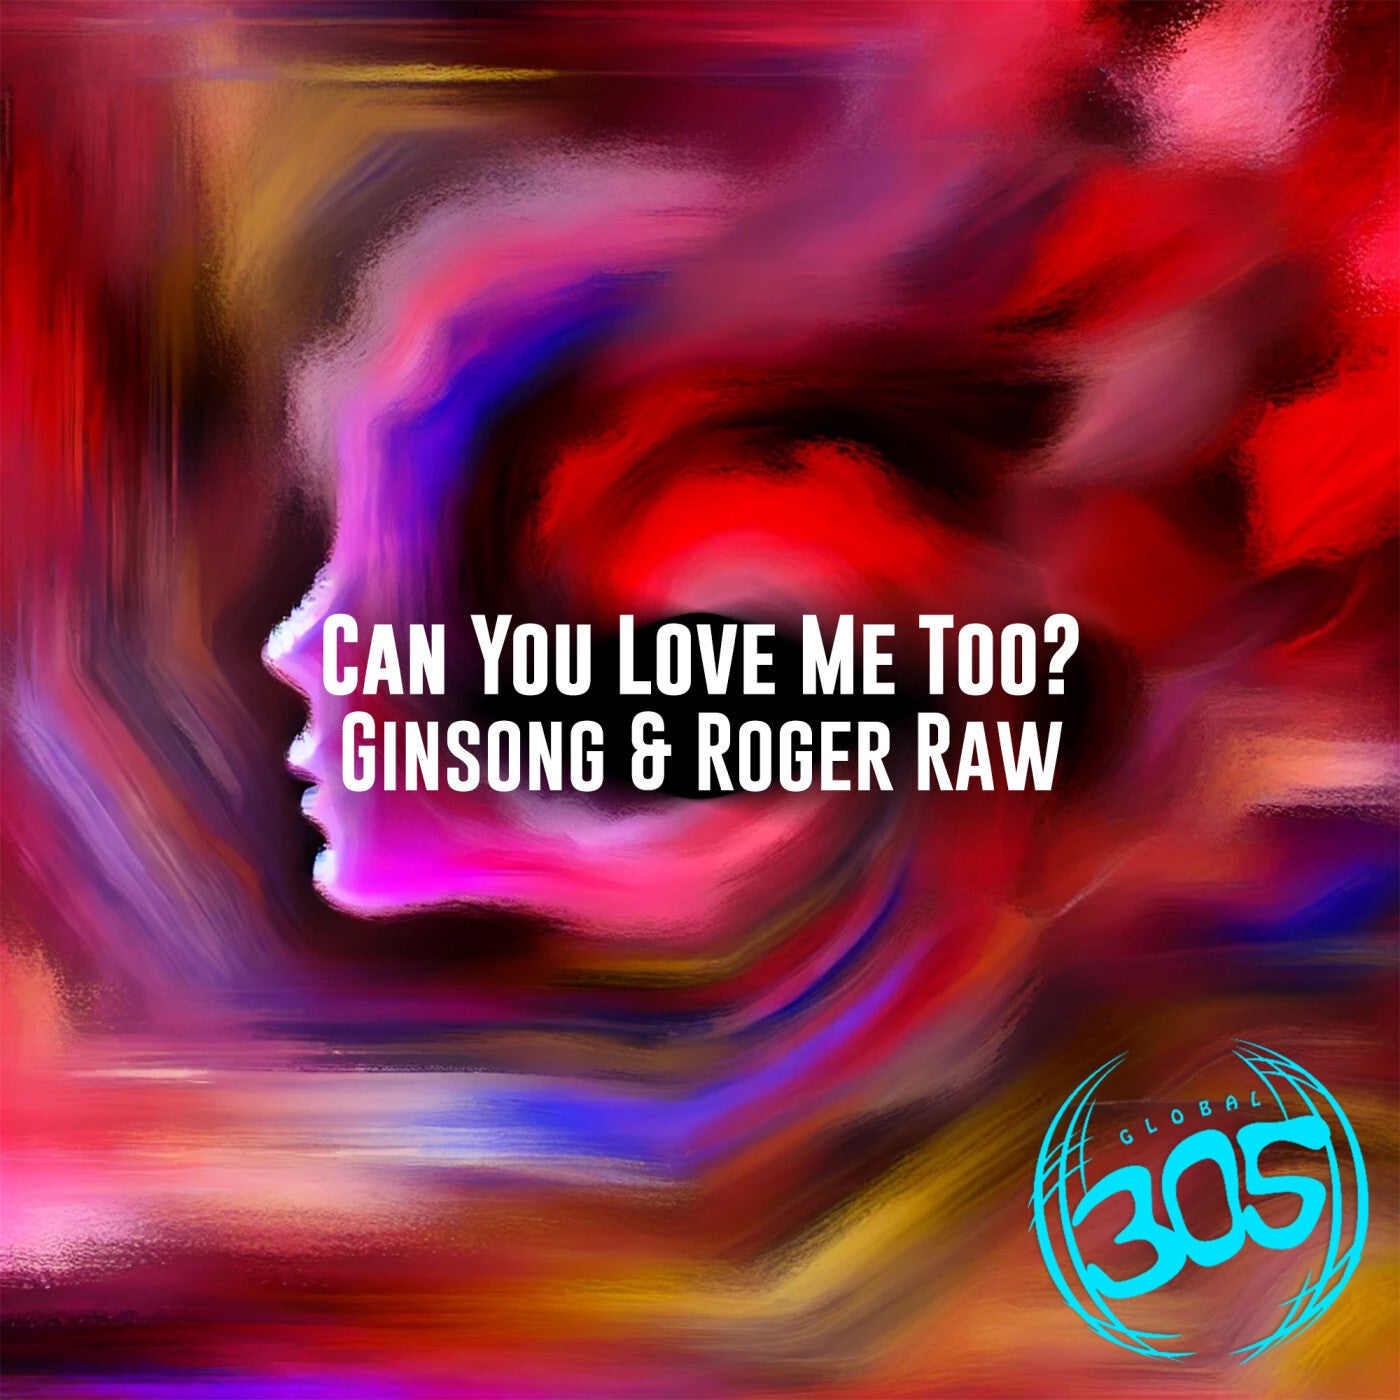 Can You Love Me Too?